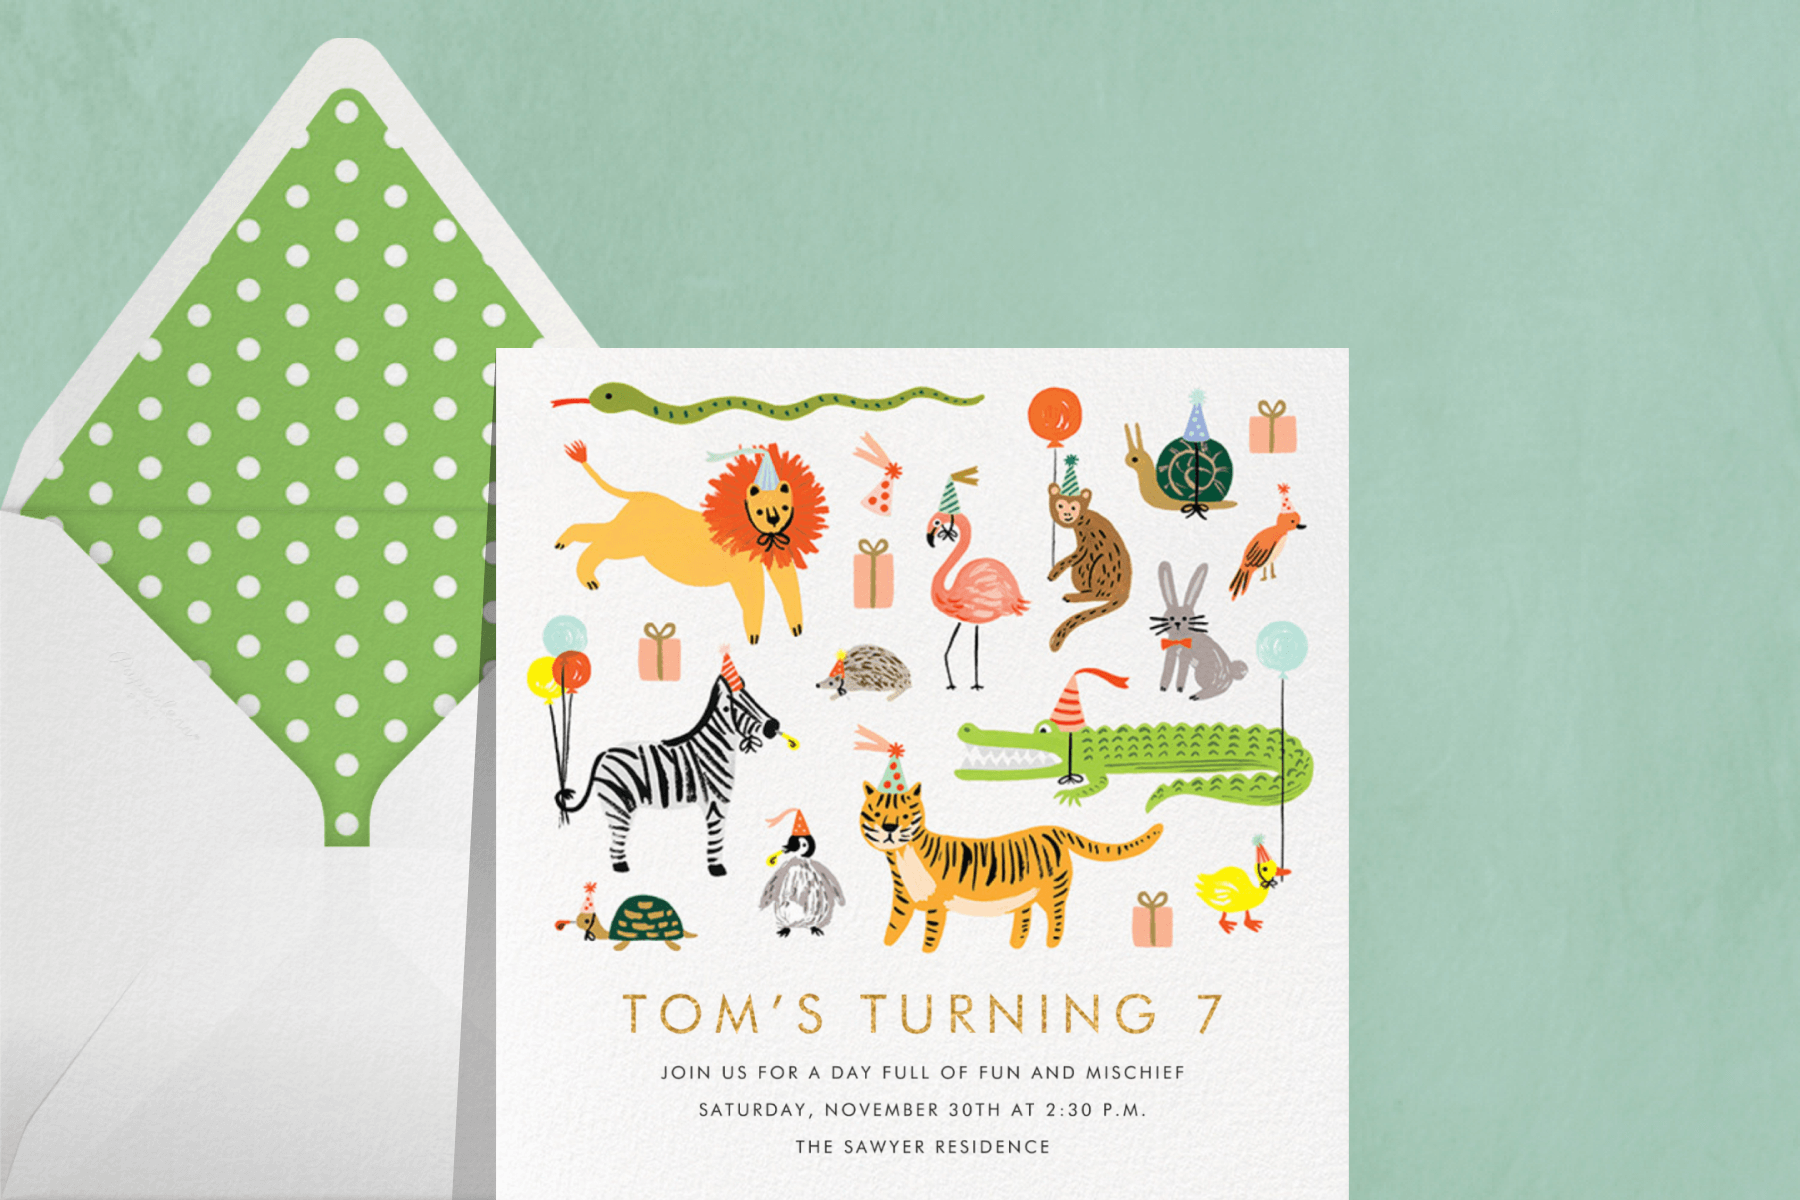 A kids’ birthday party invitation featuring animals like a lion, a zebra, and a crocodile wearing party hats.